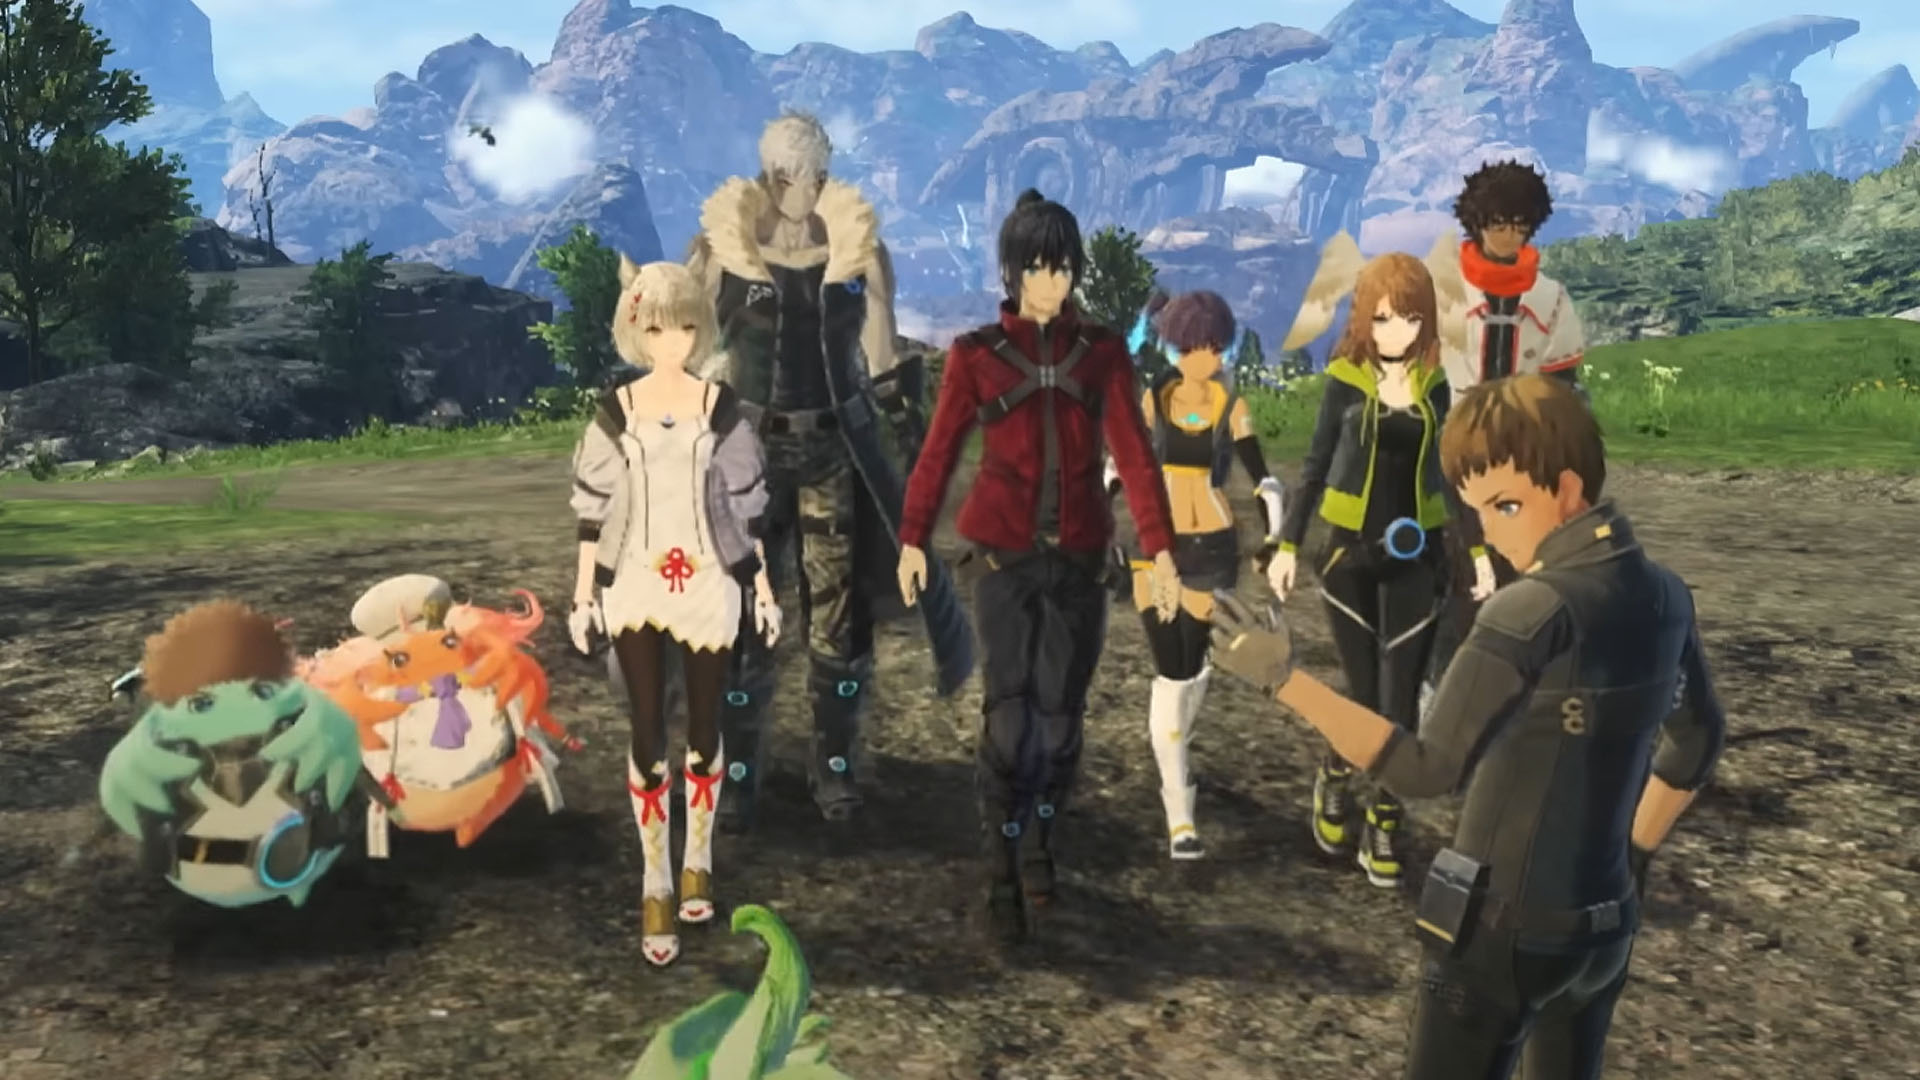 Xenoblade Chronicles 3 characters – the new recruits